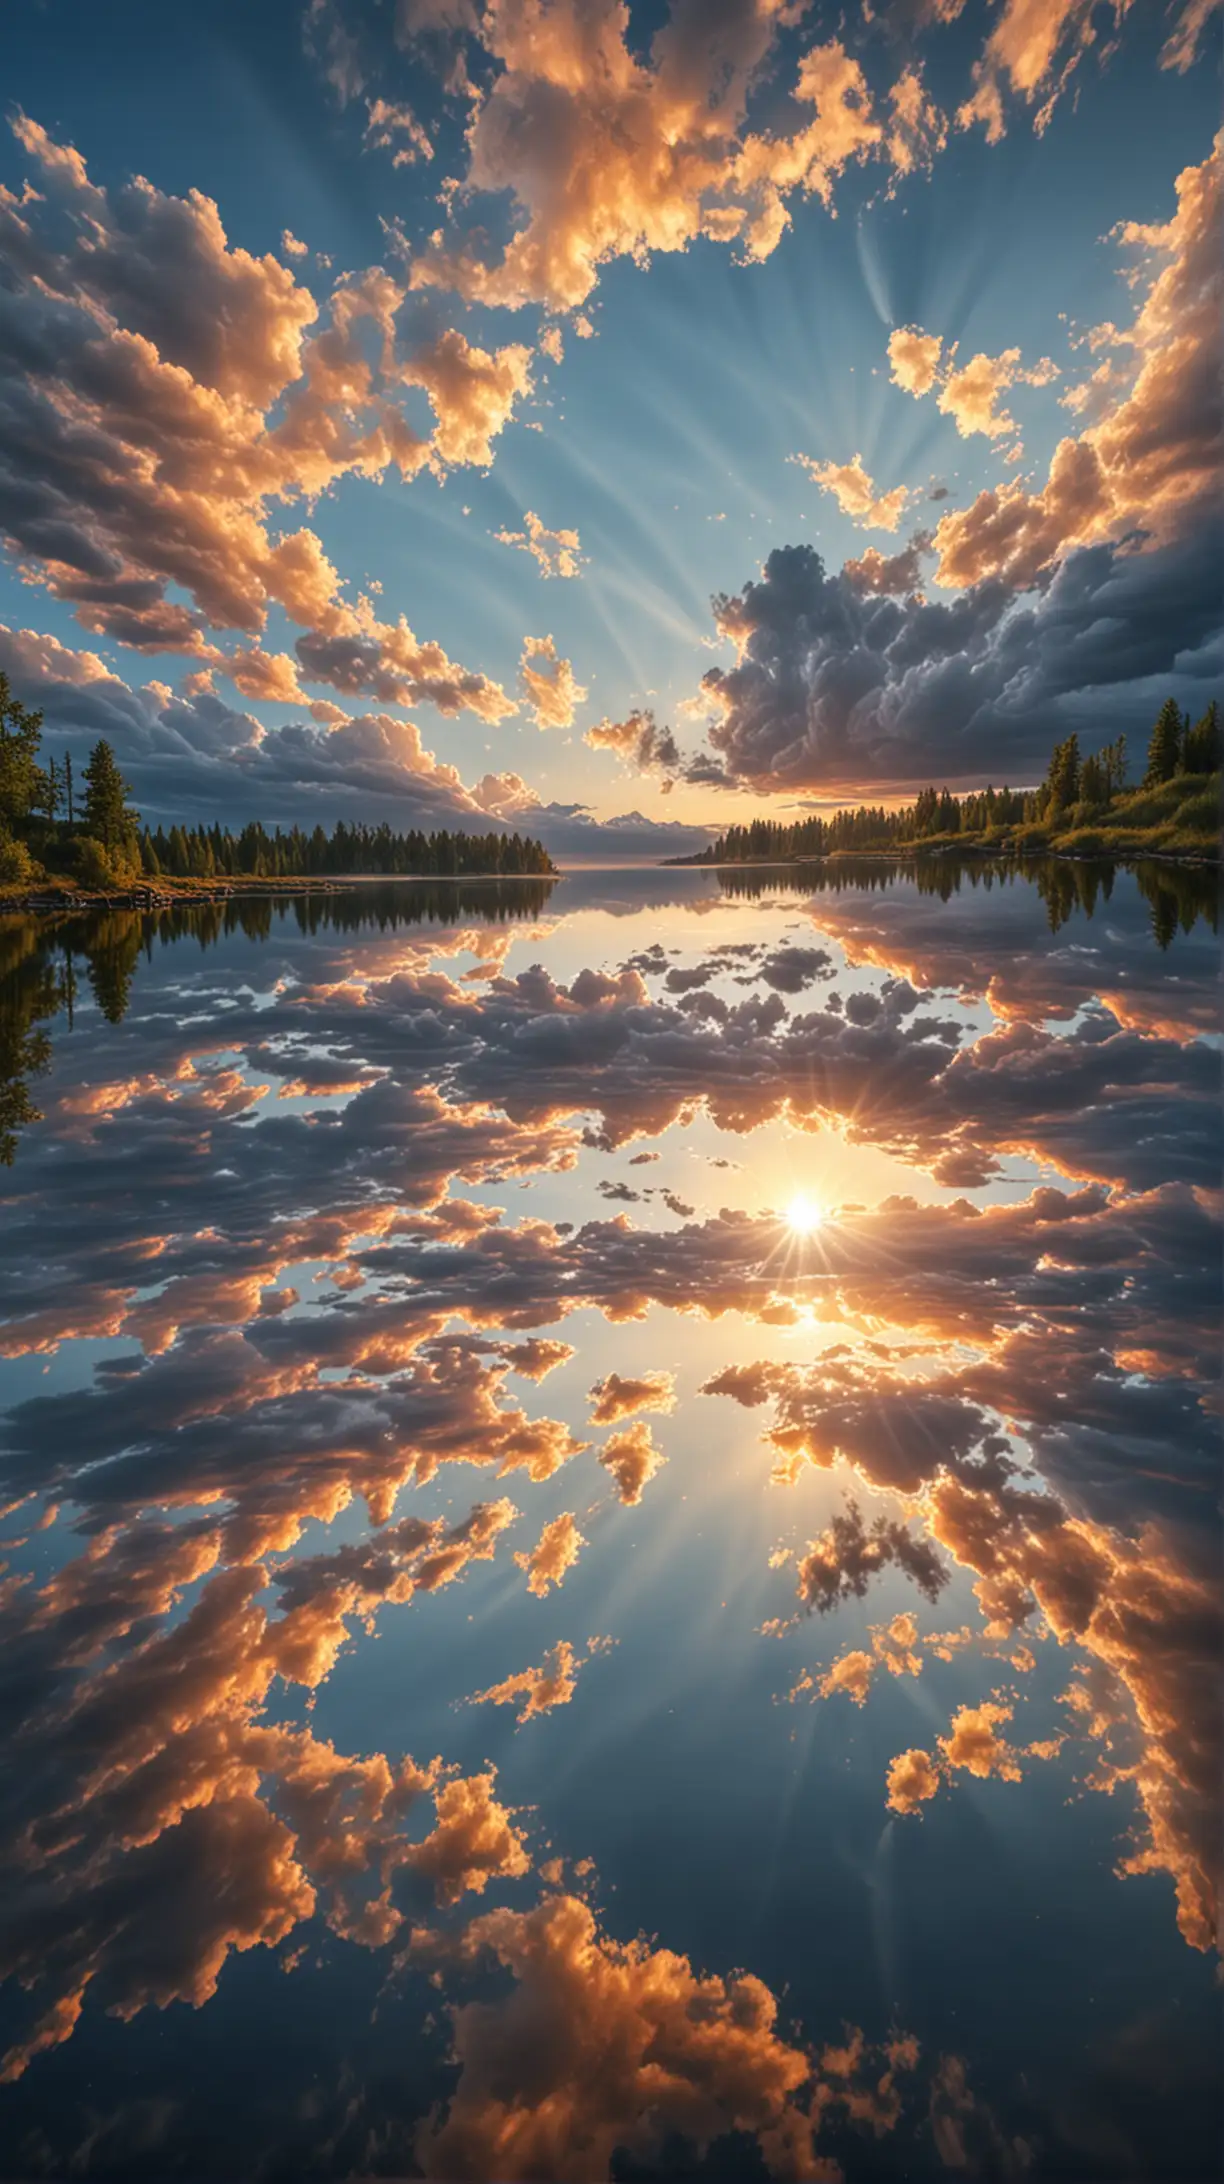 Stunning Sky Reflection in Crystal Clear Lake 4K Quality Landscape Photo